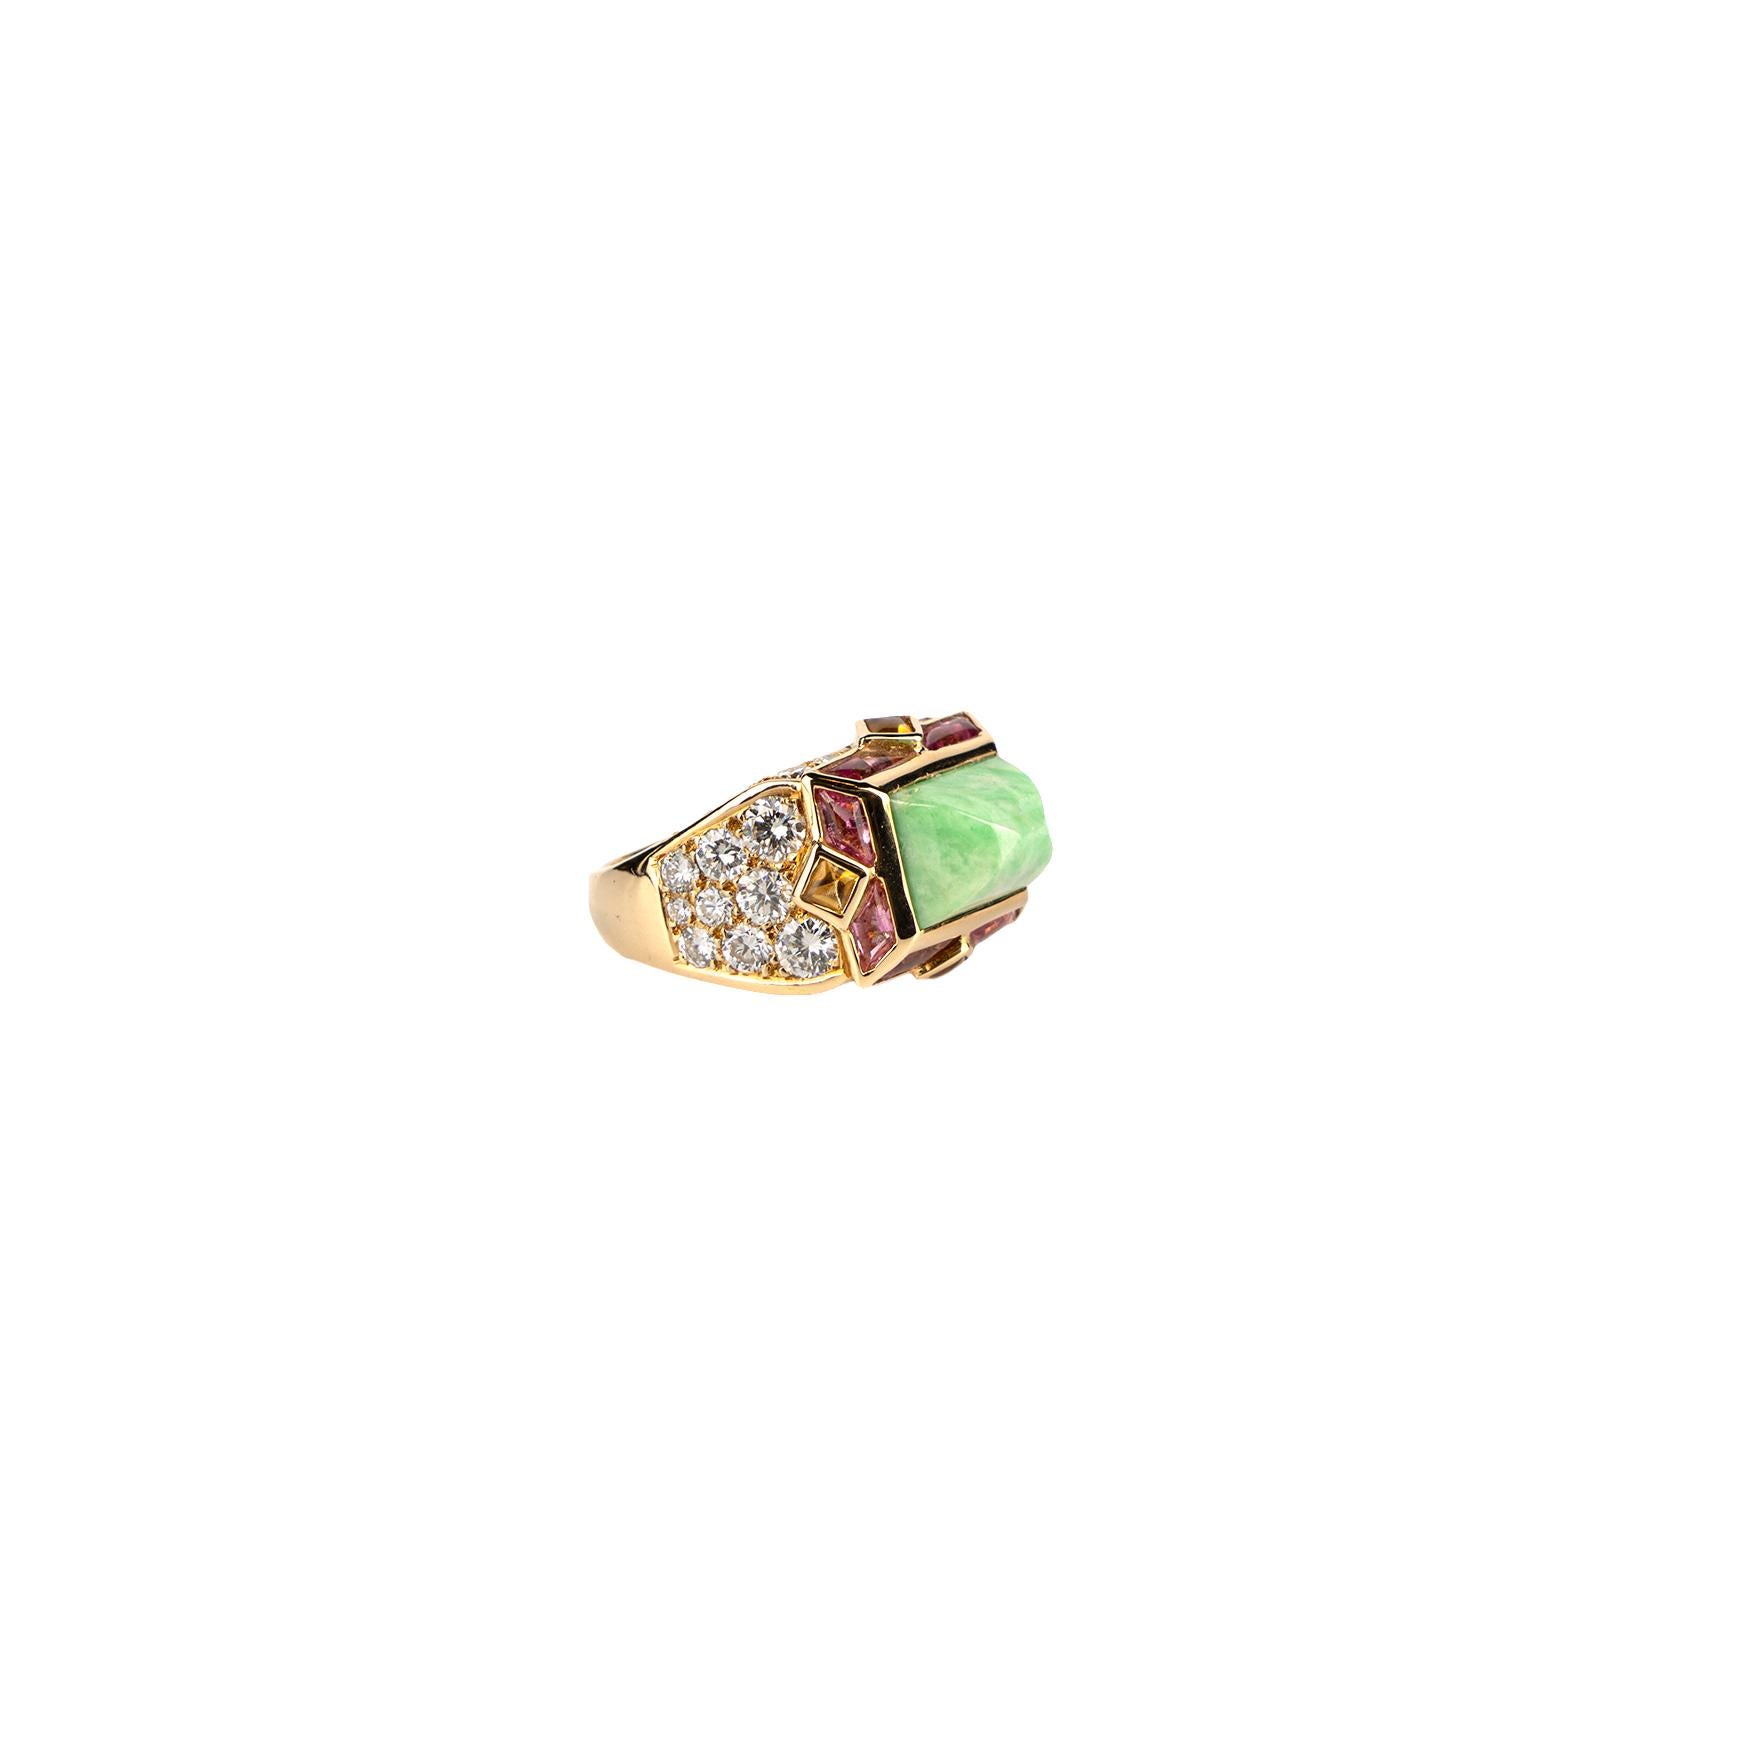 A sumptuous Mauboussin ring mounted on 18k yellow gold with jadeite, diamonds, citrine and lavender tourmaline accents. Made in France, circa 1970.
